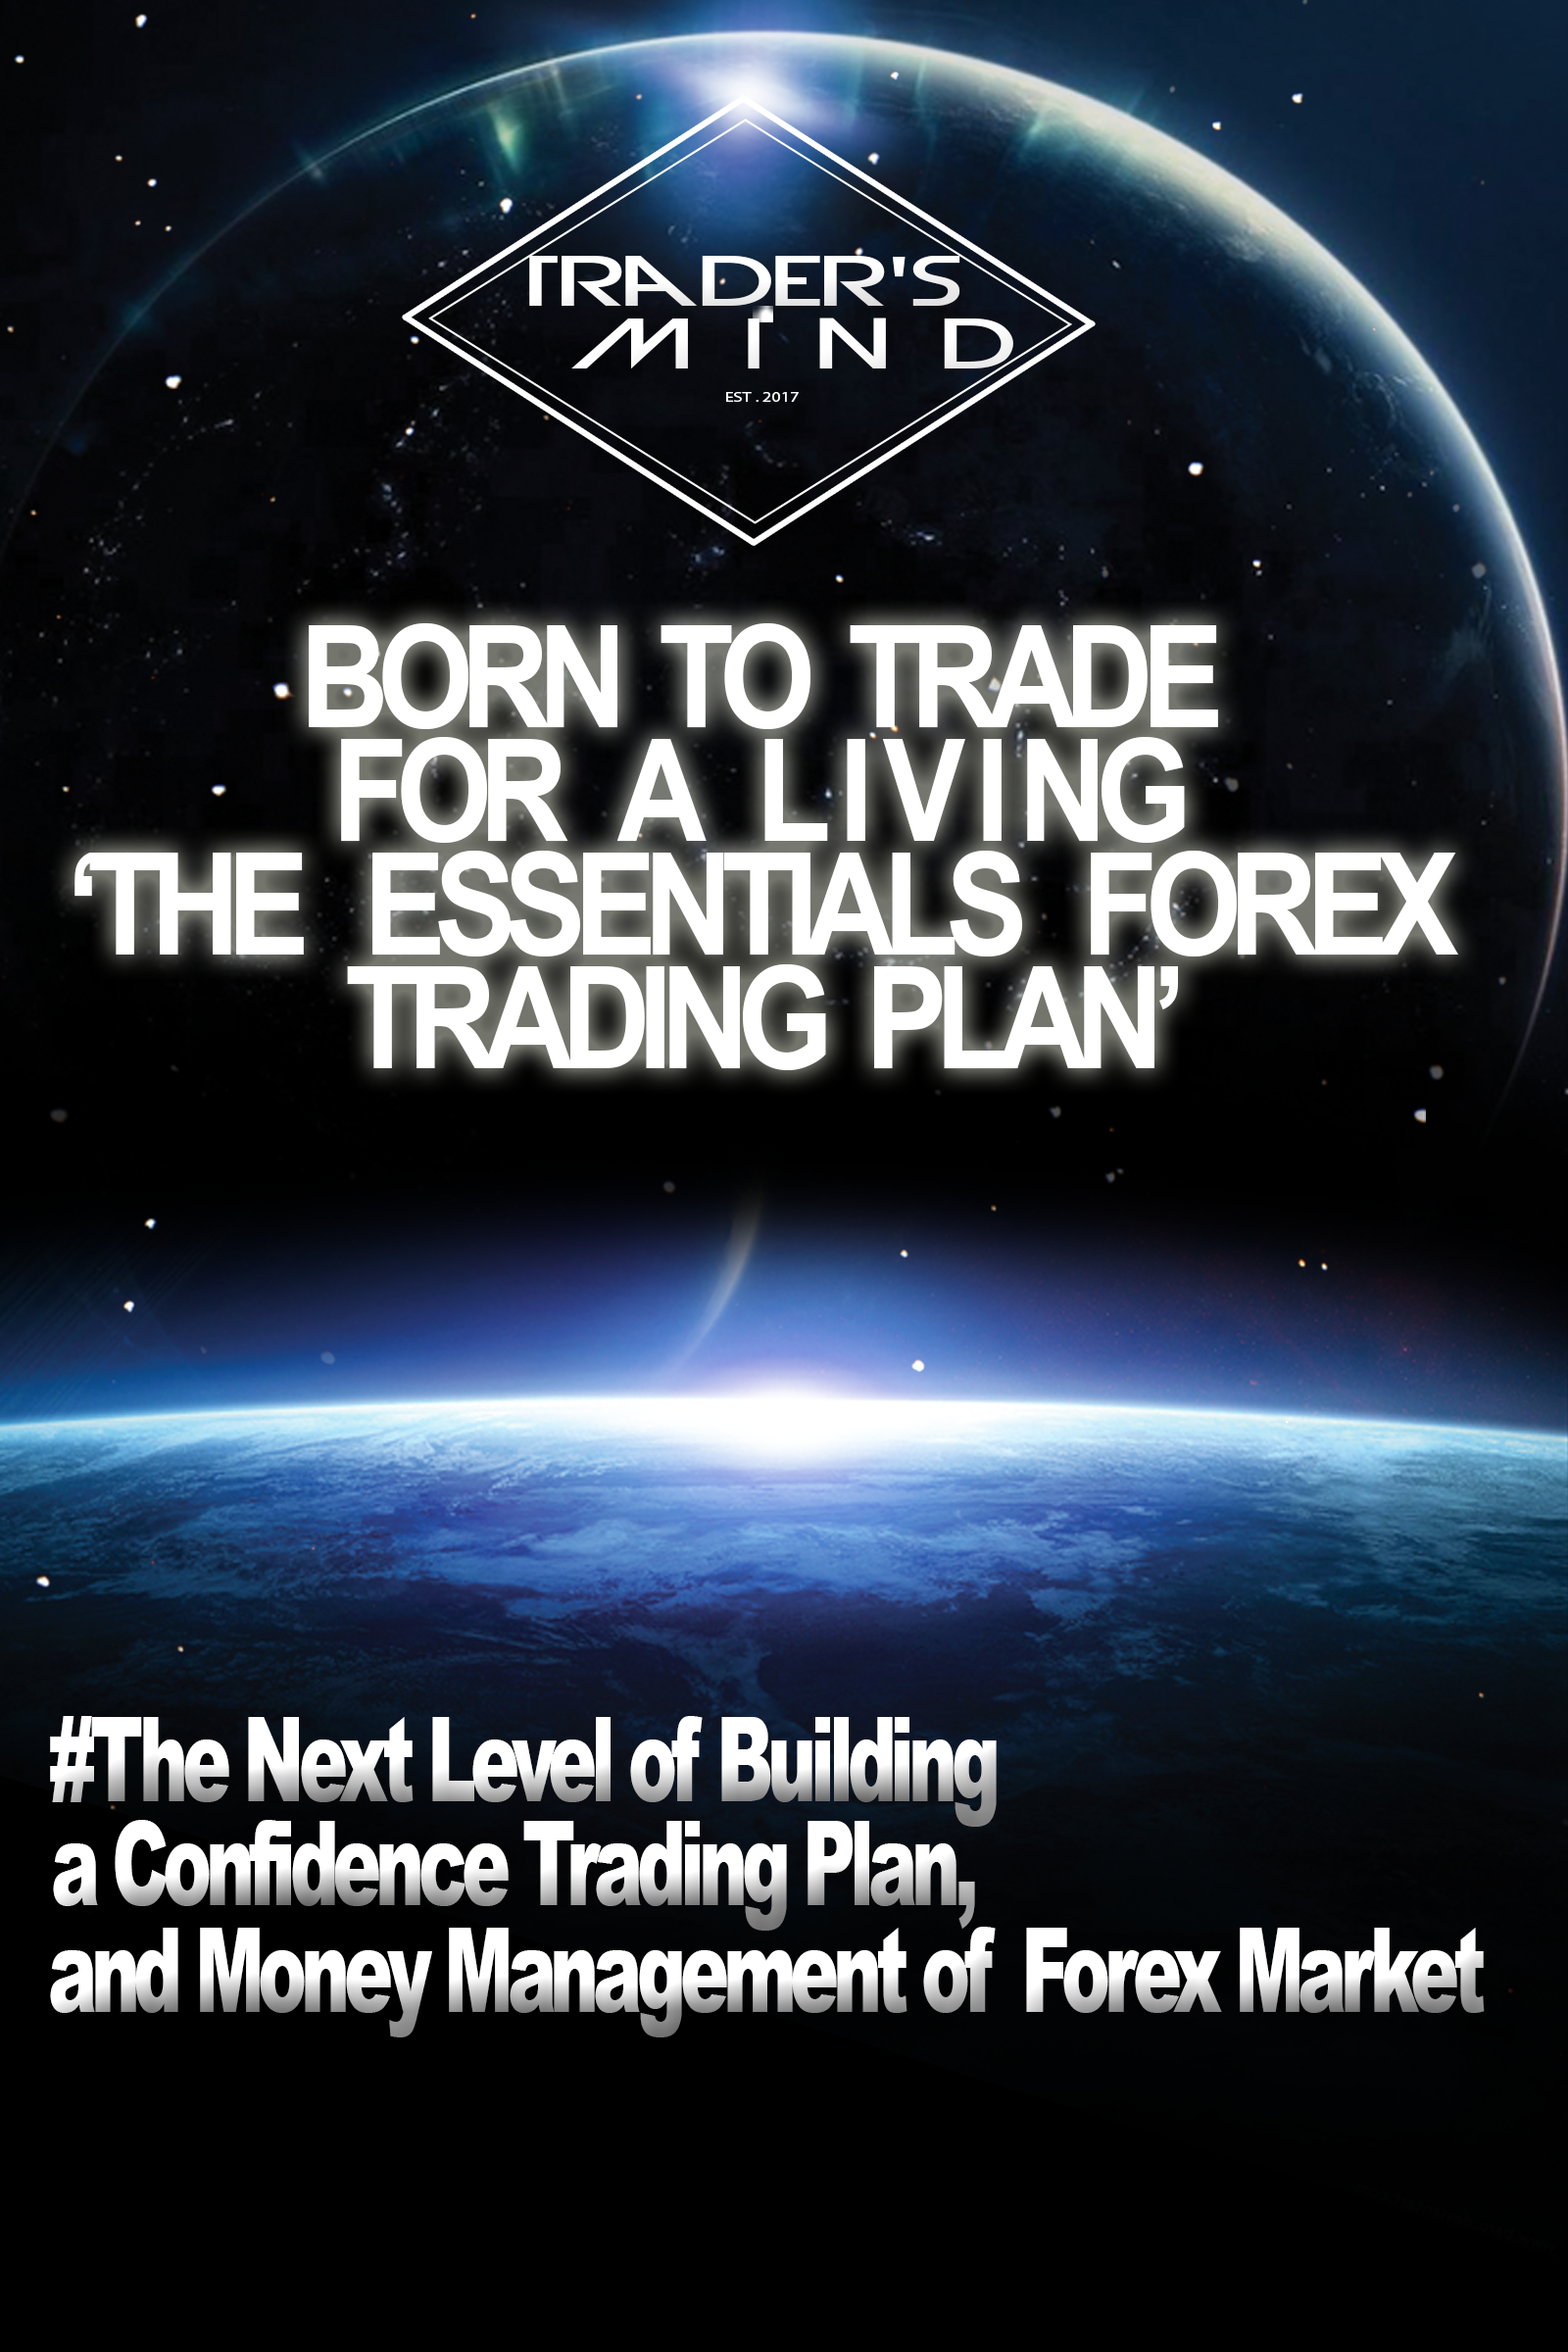 Smashwords Building A Confidence Forex Trading Plan By Tradersmind - 